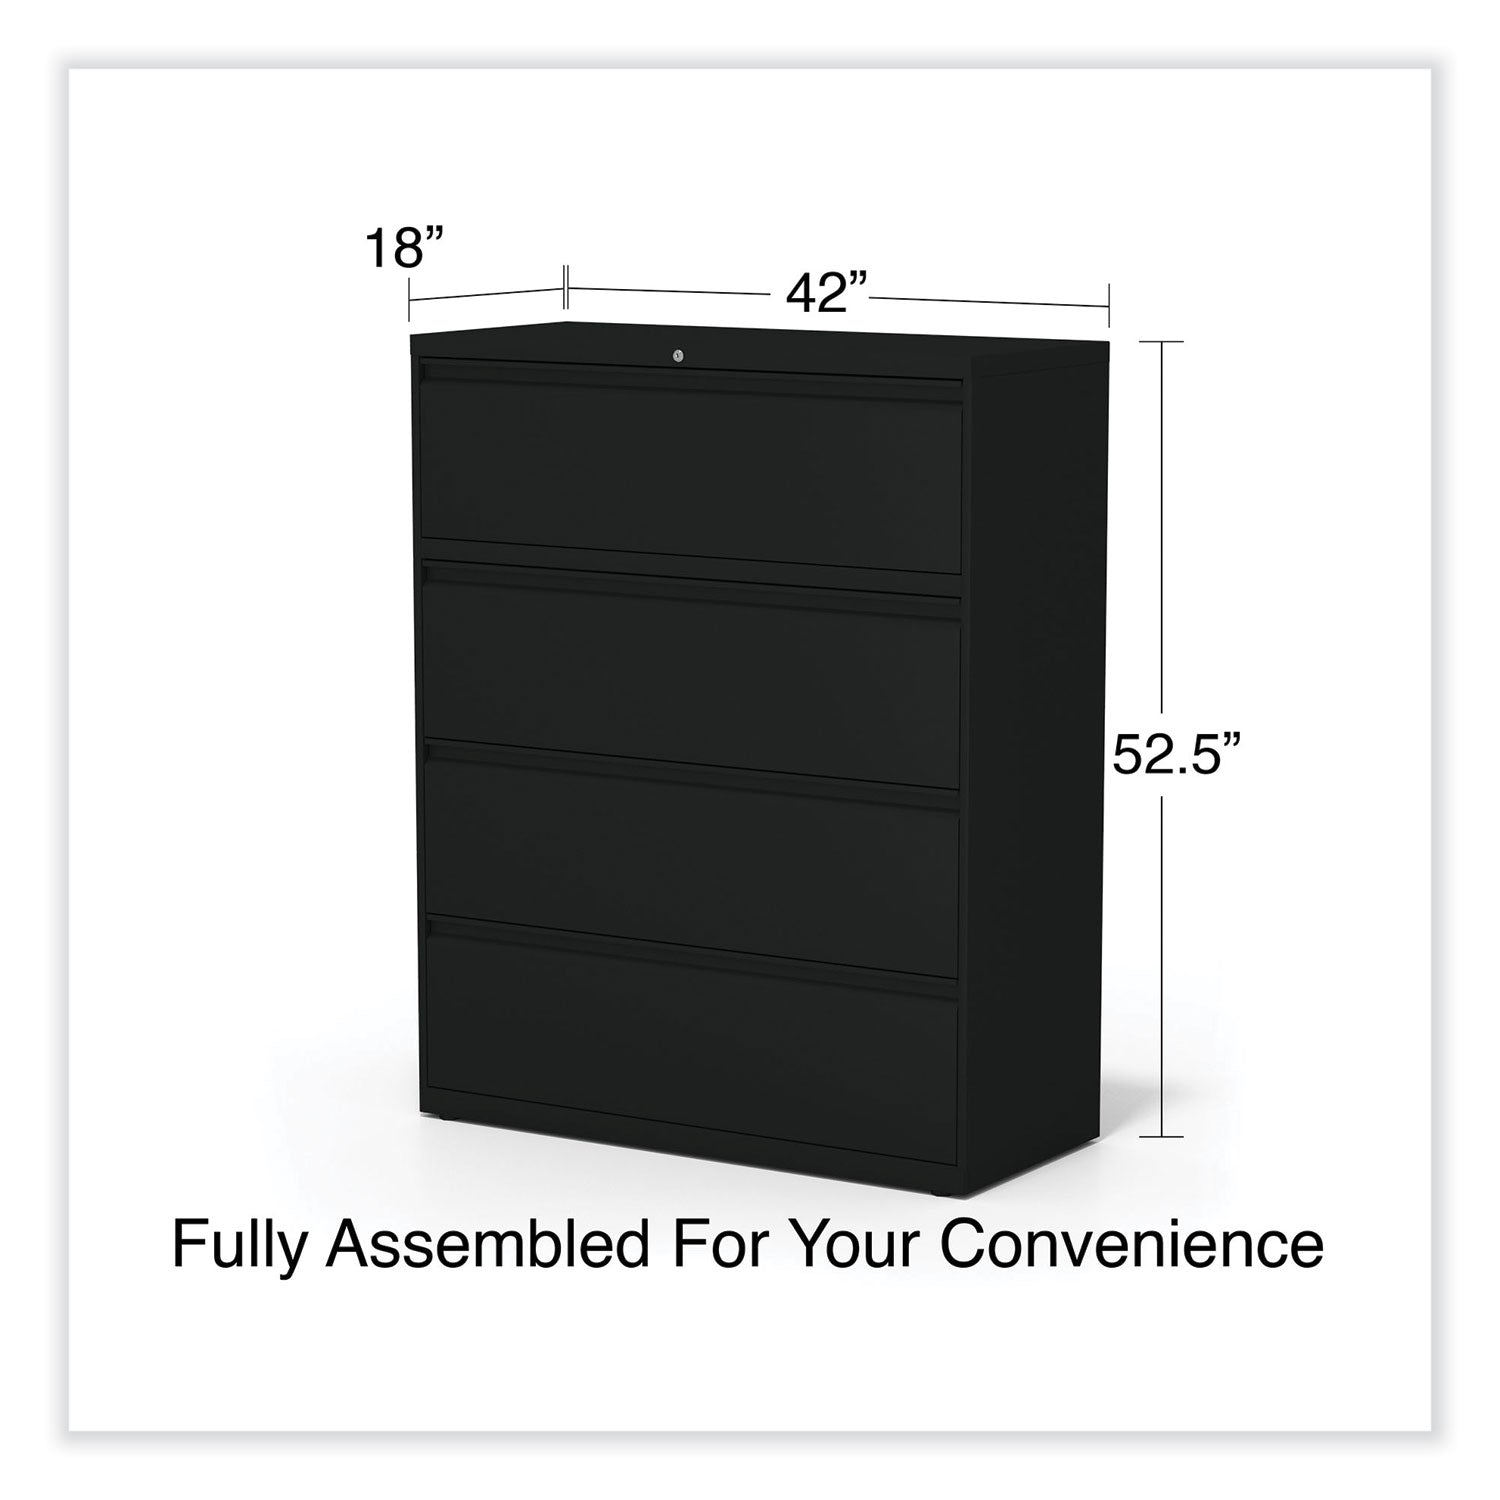 lateral-file-4-legal-letter-size-file-drawers-black-42-x-1863-x-525_alehlf4254bl - 6